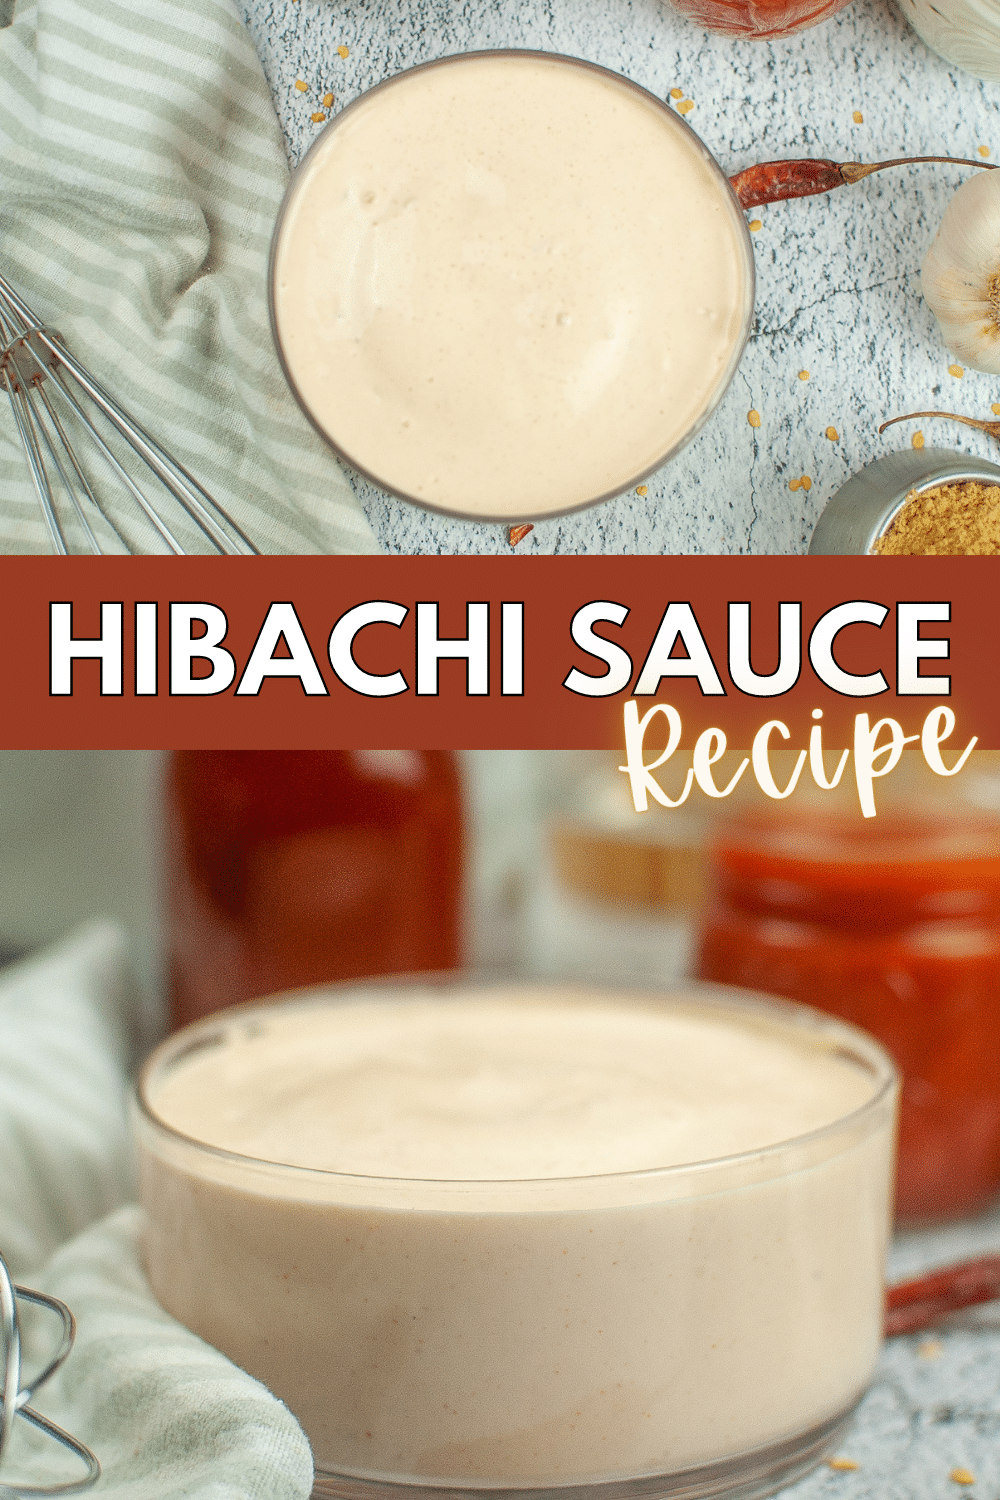 Experience restaurant-quality sauce with this homemade hibachi sauce recipe, which harmoniously blends creaminess and satisfying tanginess. #hibachisaucerecipe #hibachi #yumyumsauce #hibachisauce #dippingsauce via @wondermomwannab